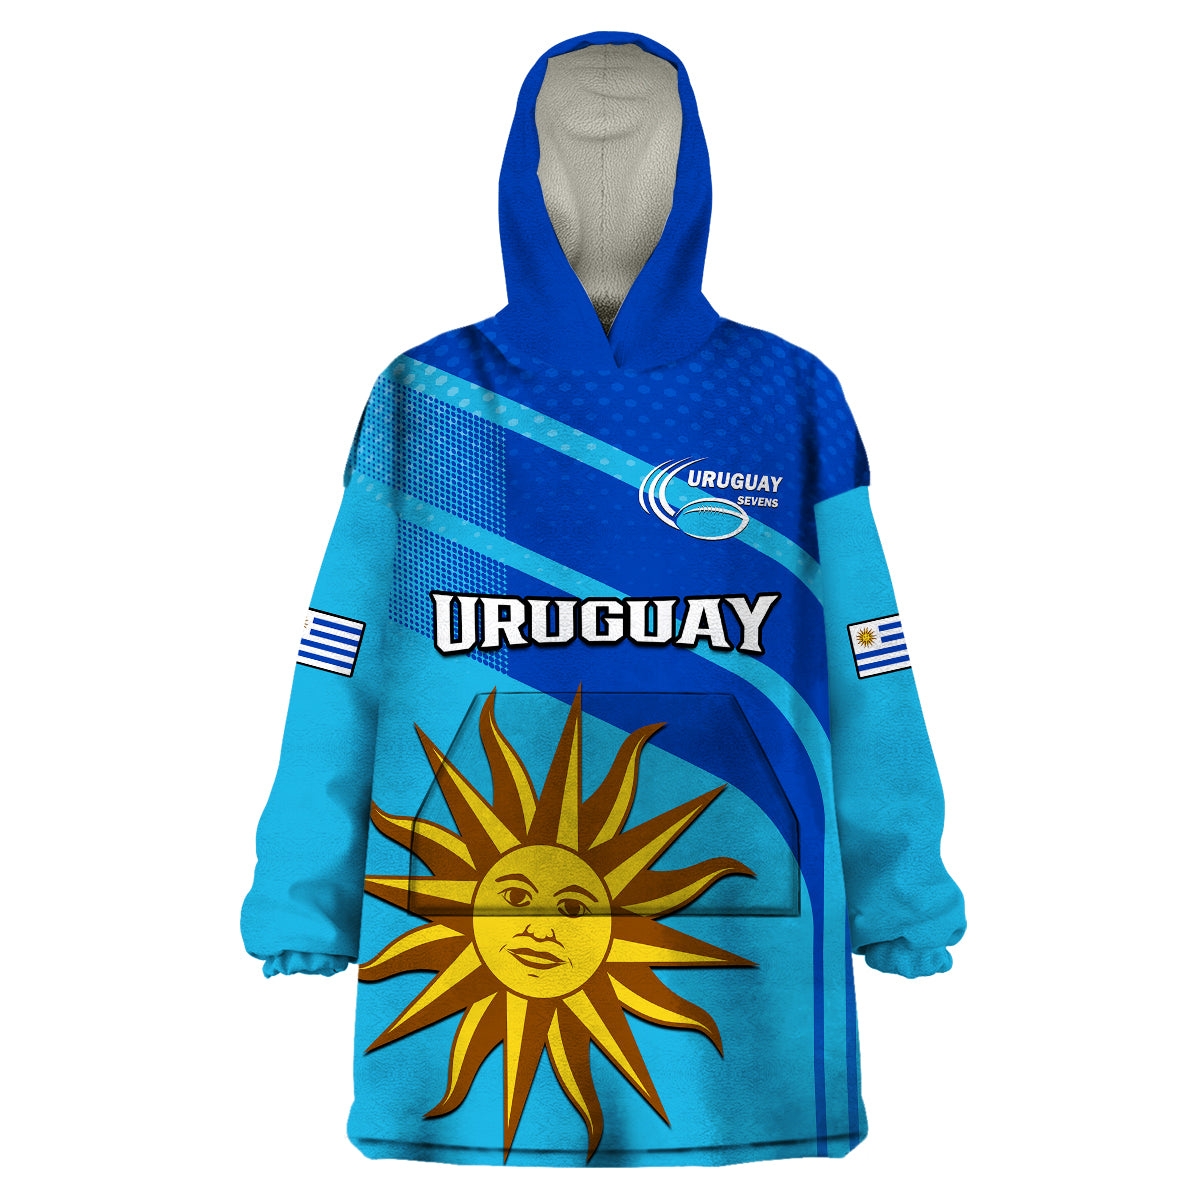 custom-text-and-number-uruguay-rugby-7s-sporty-style-wearable-blanket-hoodie